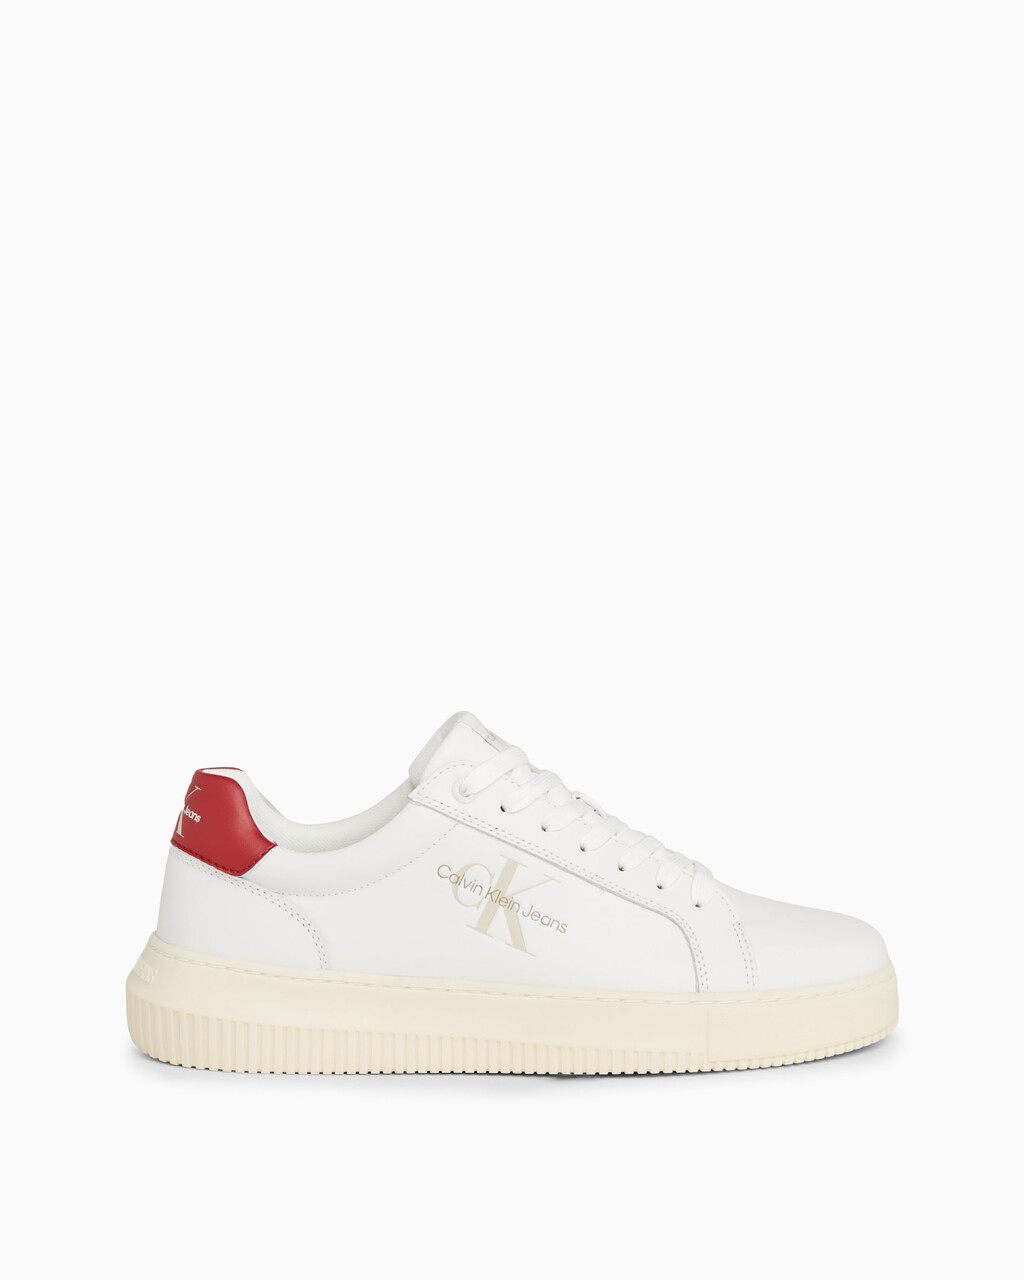 Leather Trainers, WHITE/GARNET, hi-res